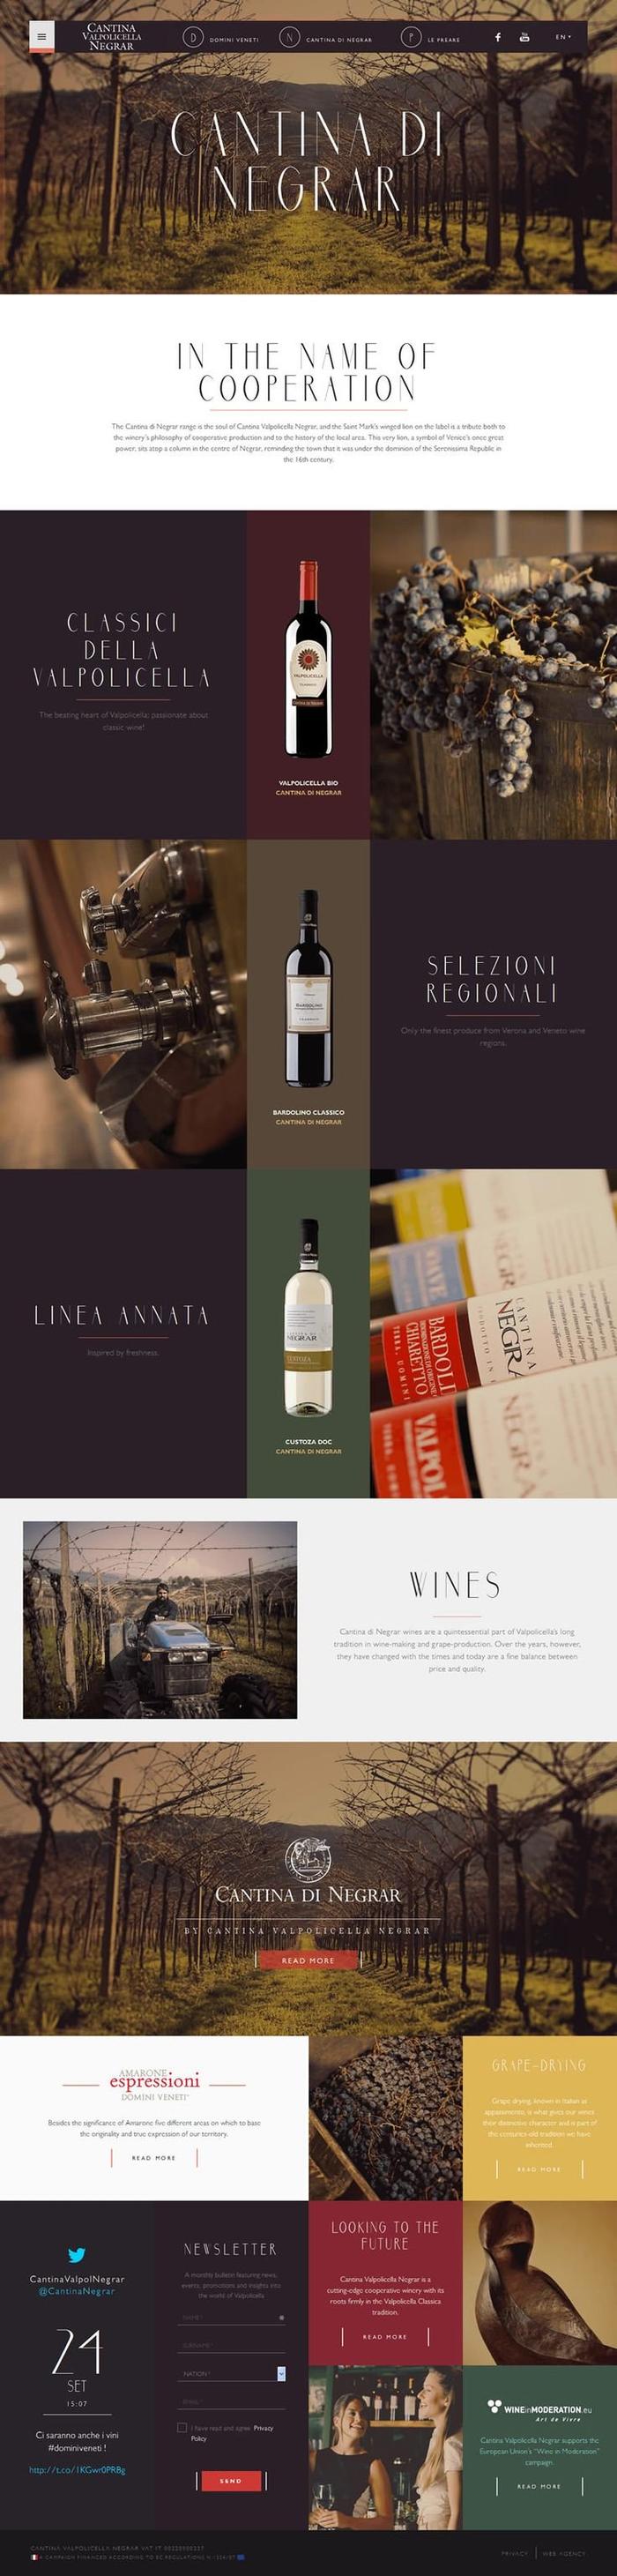 products list, website's layout. #grid #webdesign #wine